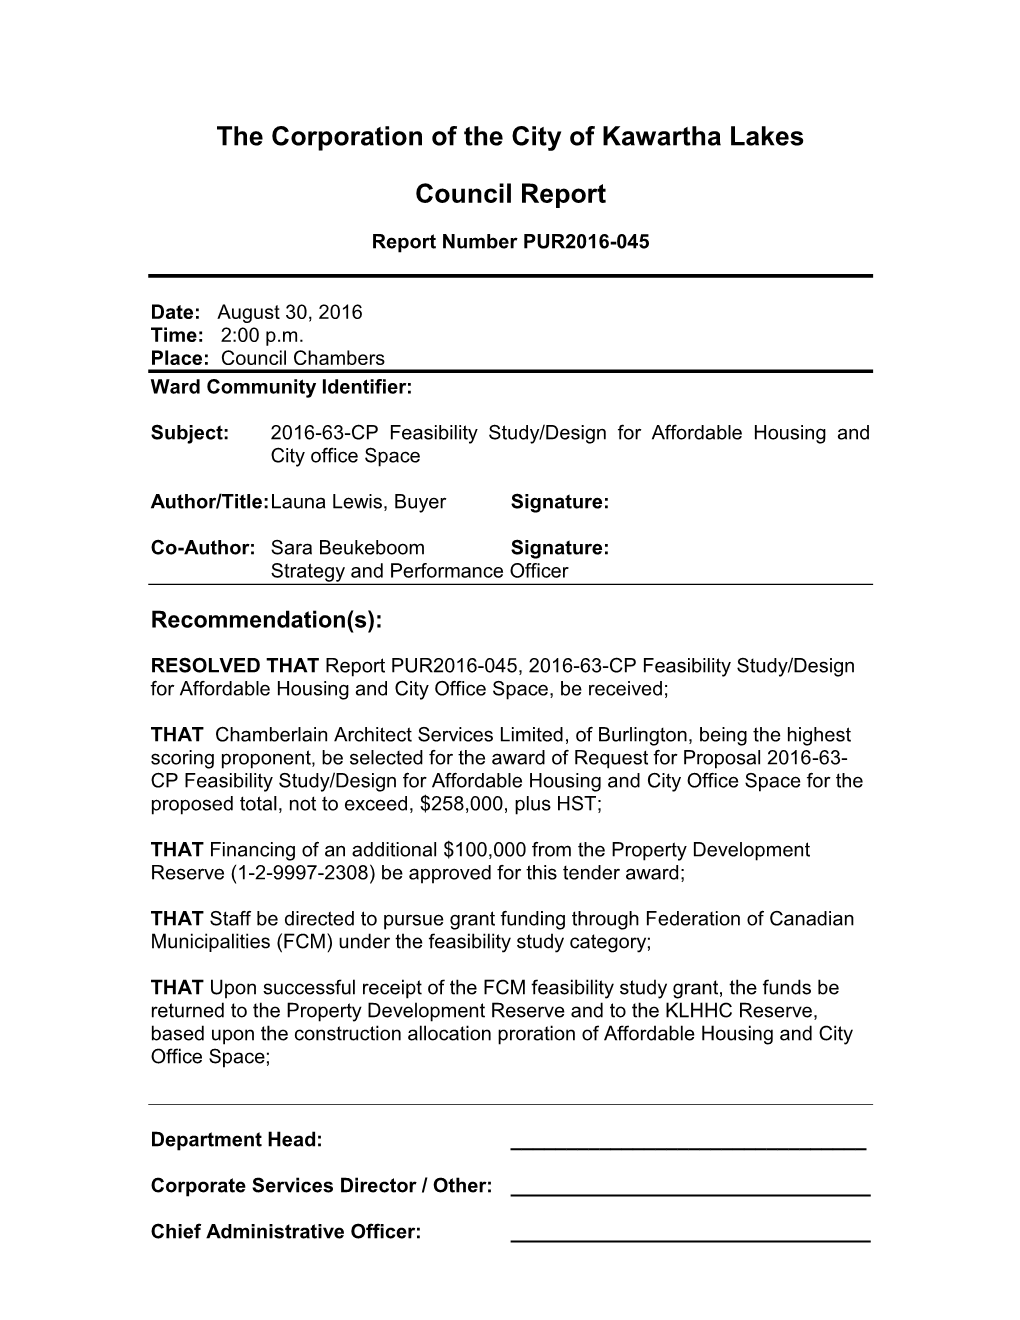 The Corporation of the City of Kawartha Lakes Council Report